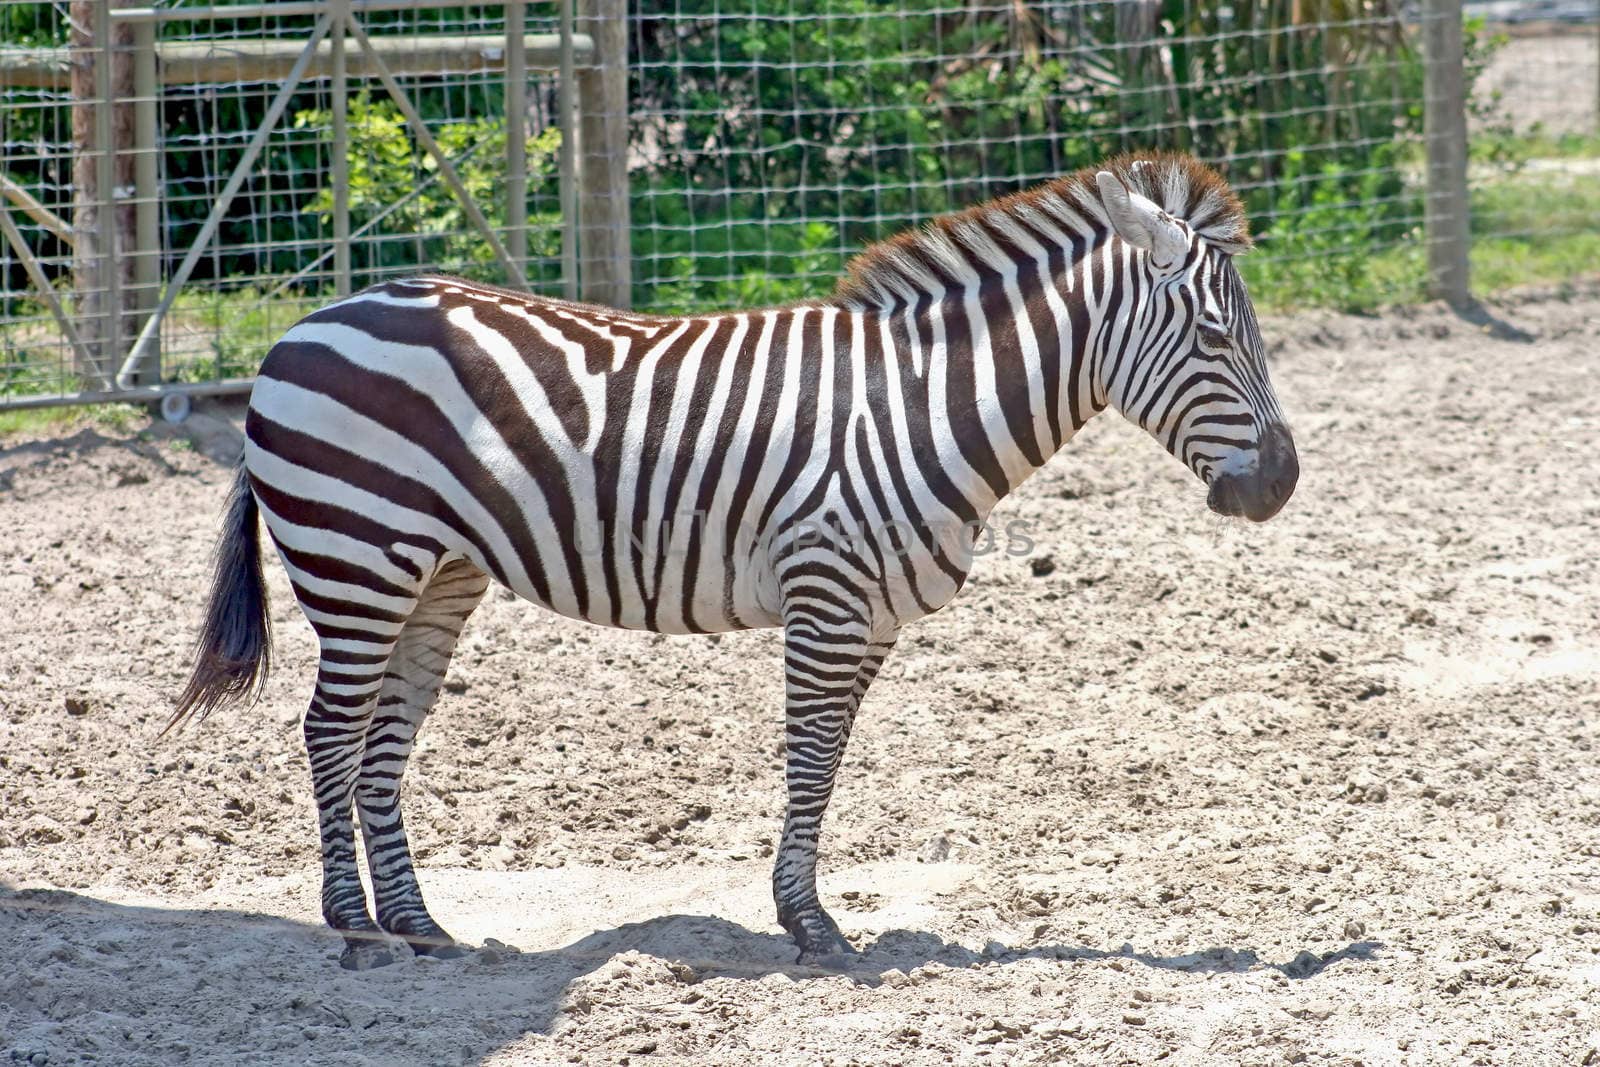 A zebra standing in the dirt with fence behind